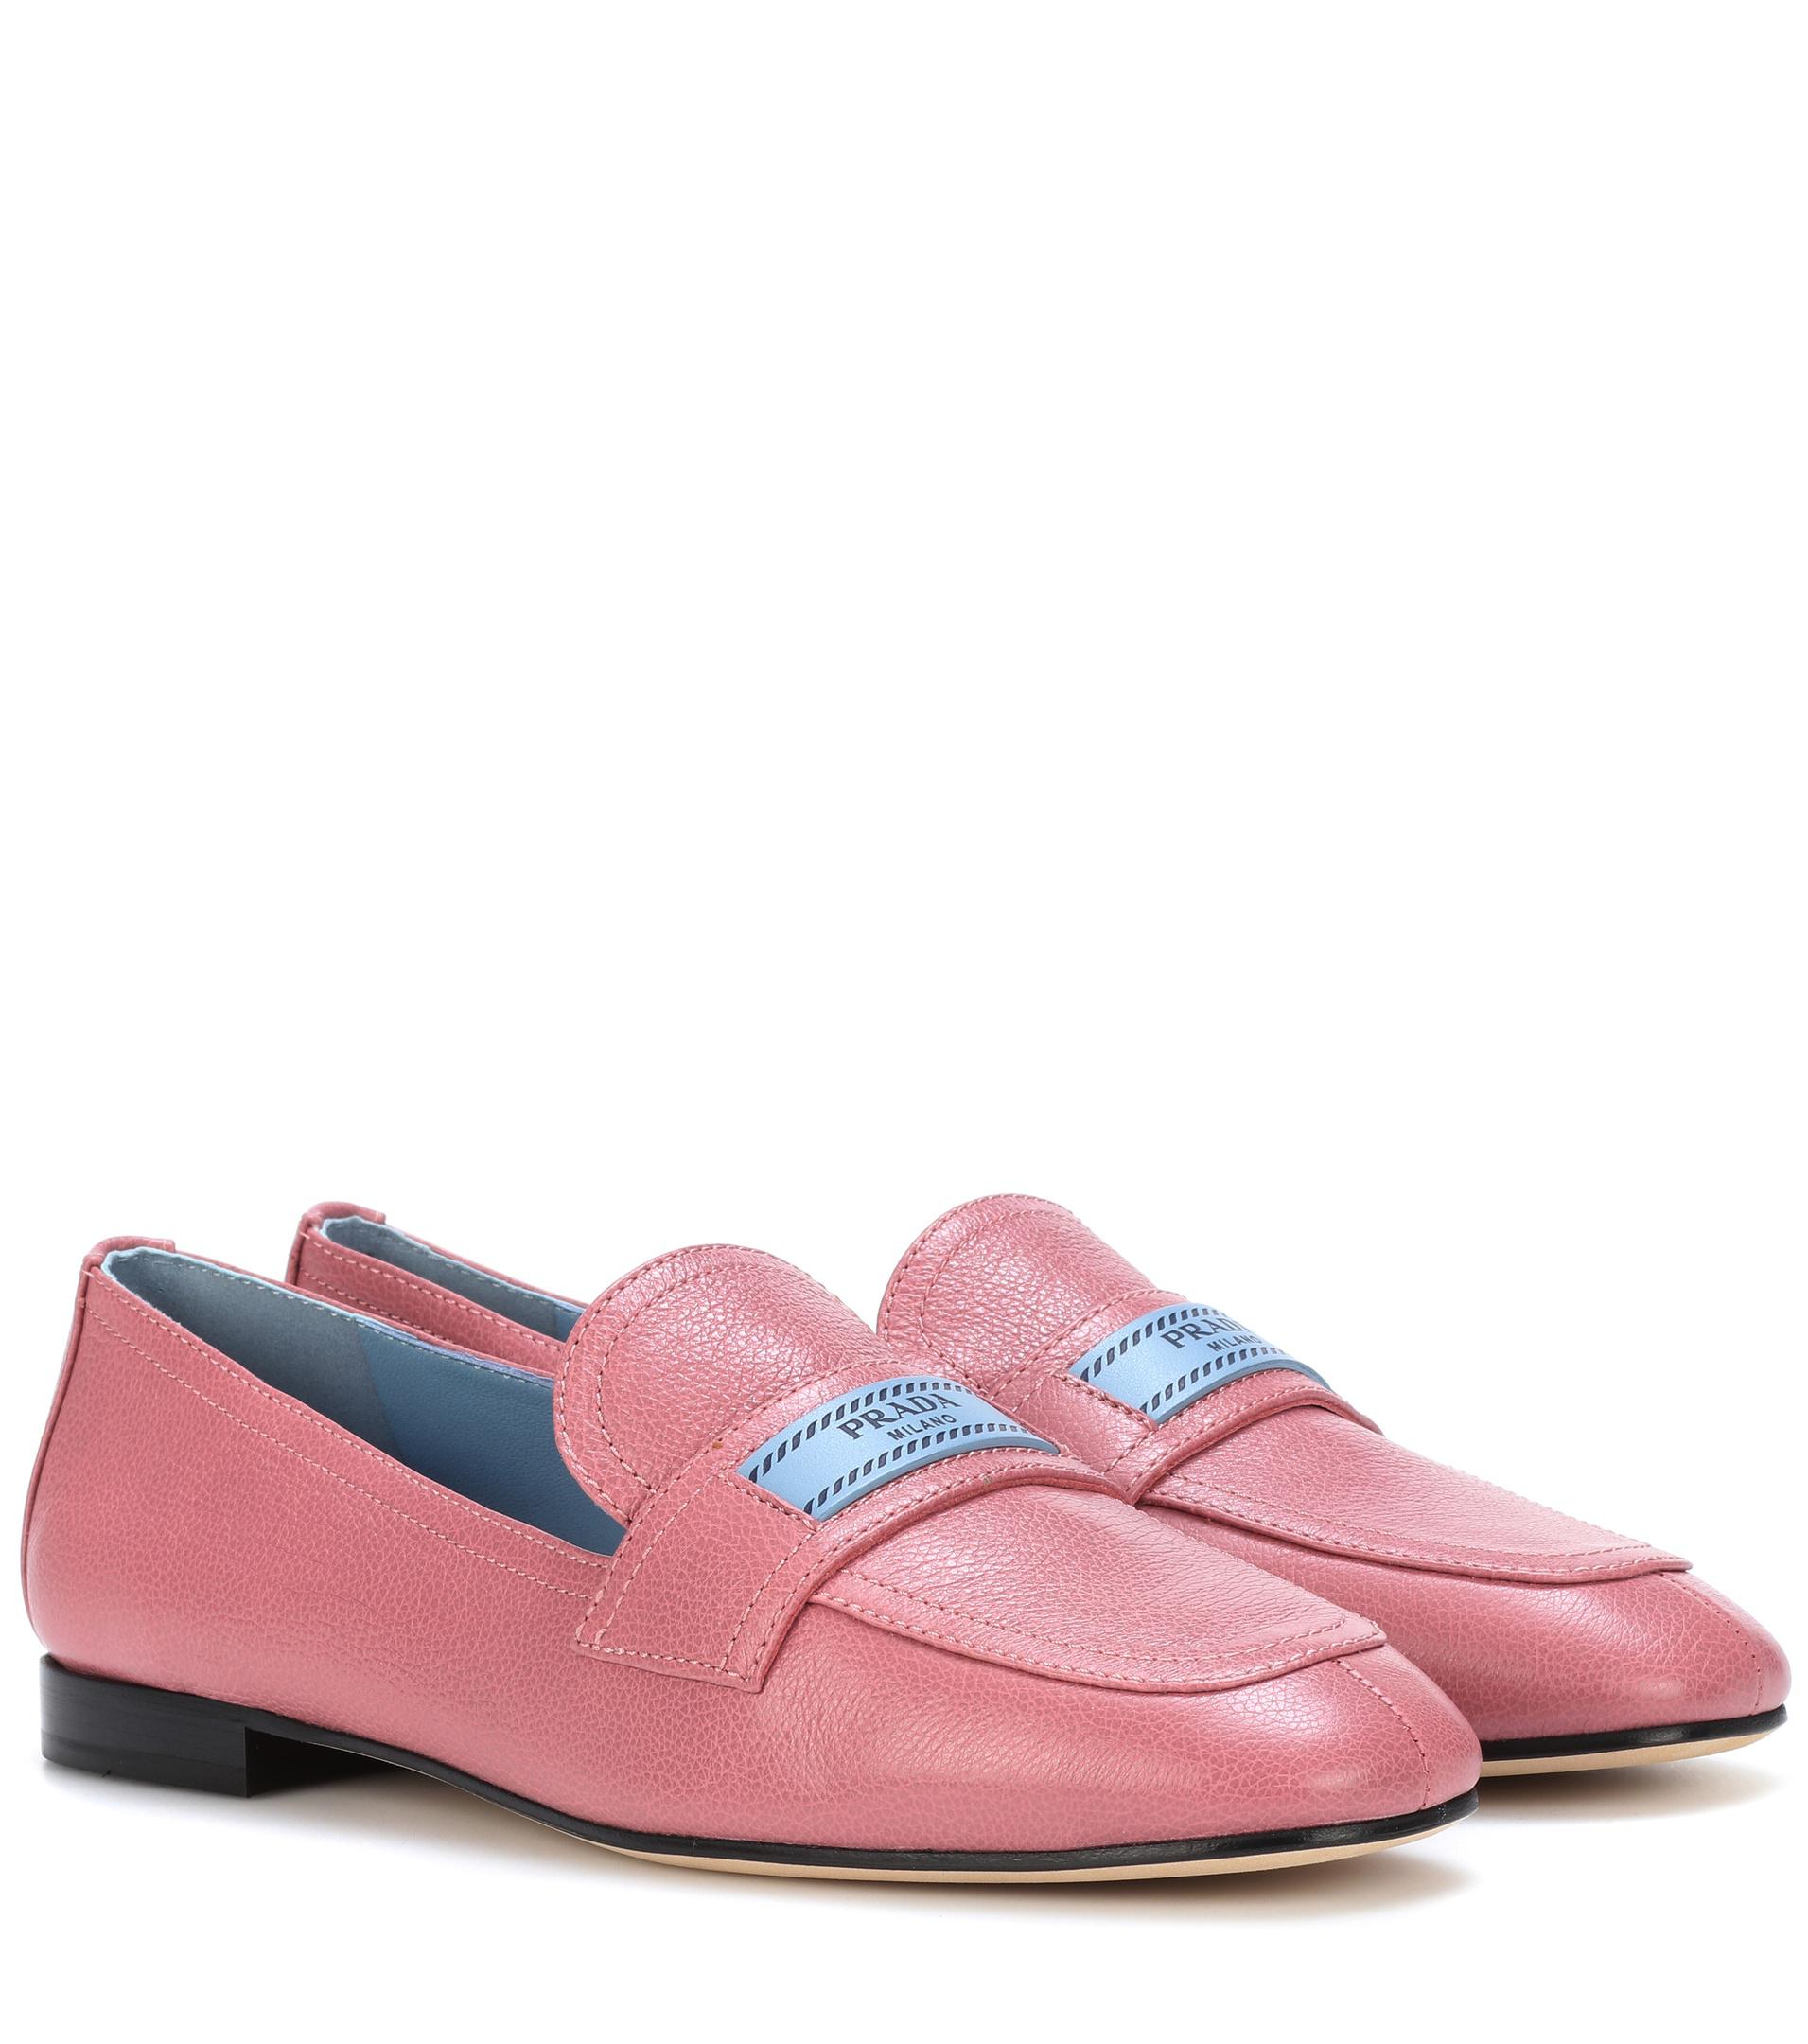 Prada Leather Loafers in Pink - Lyst